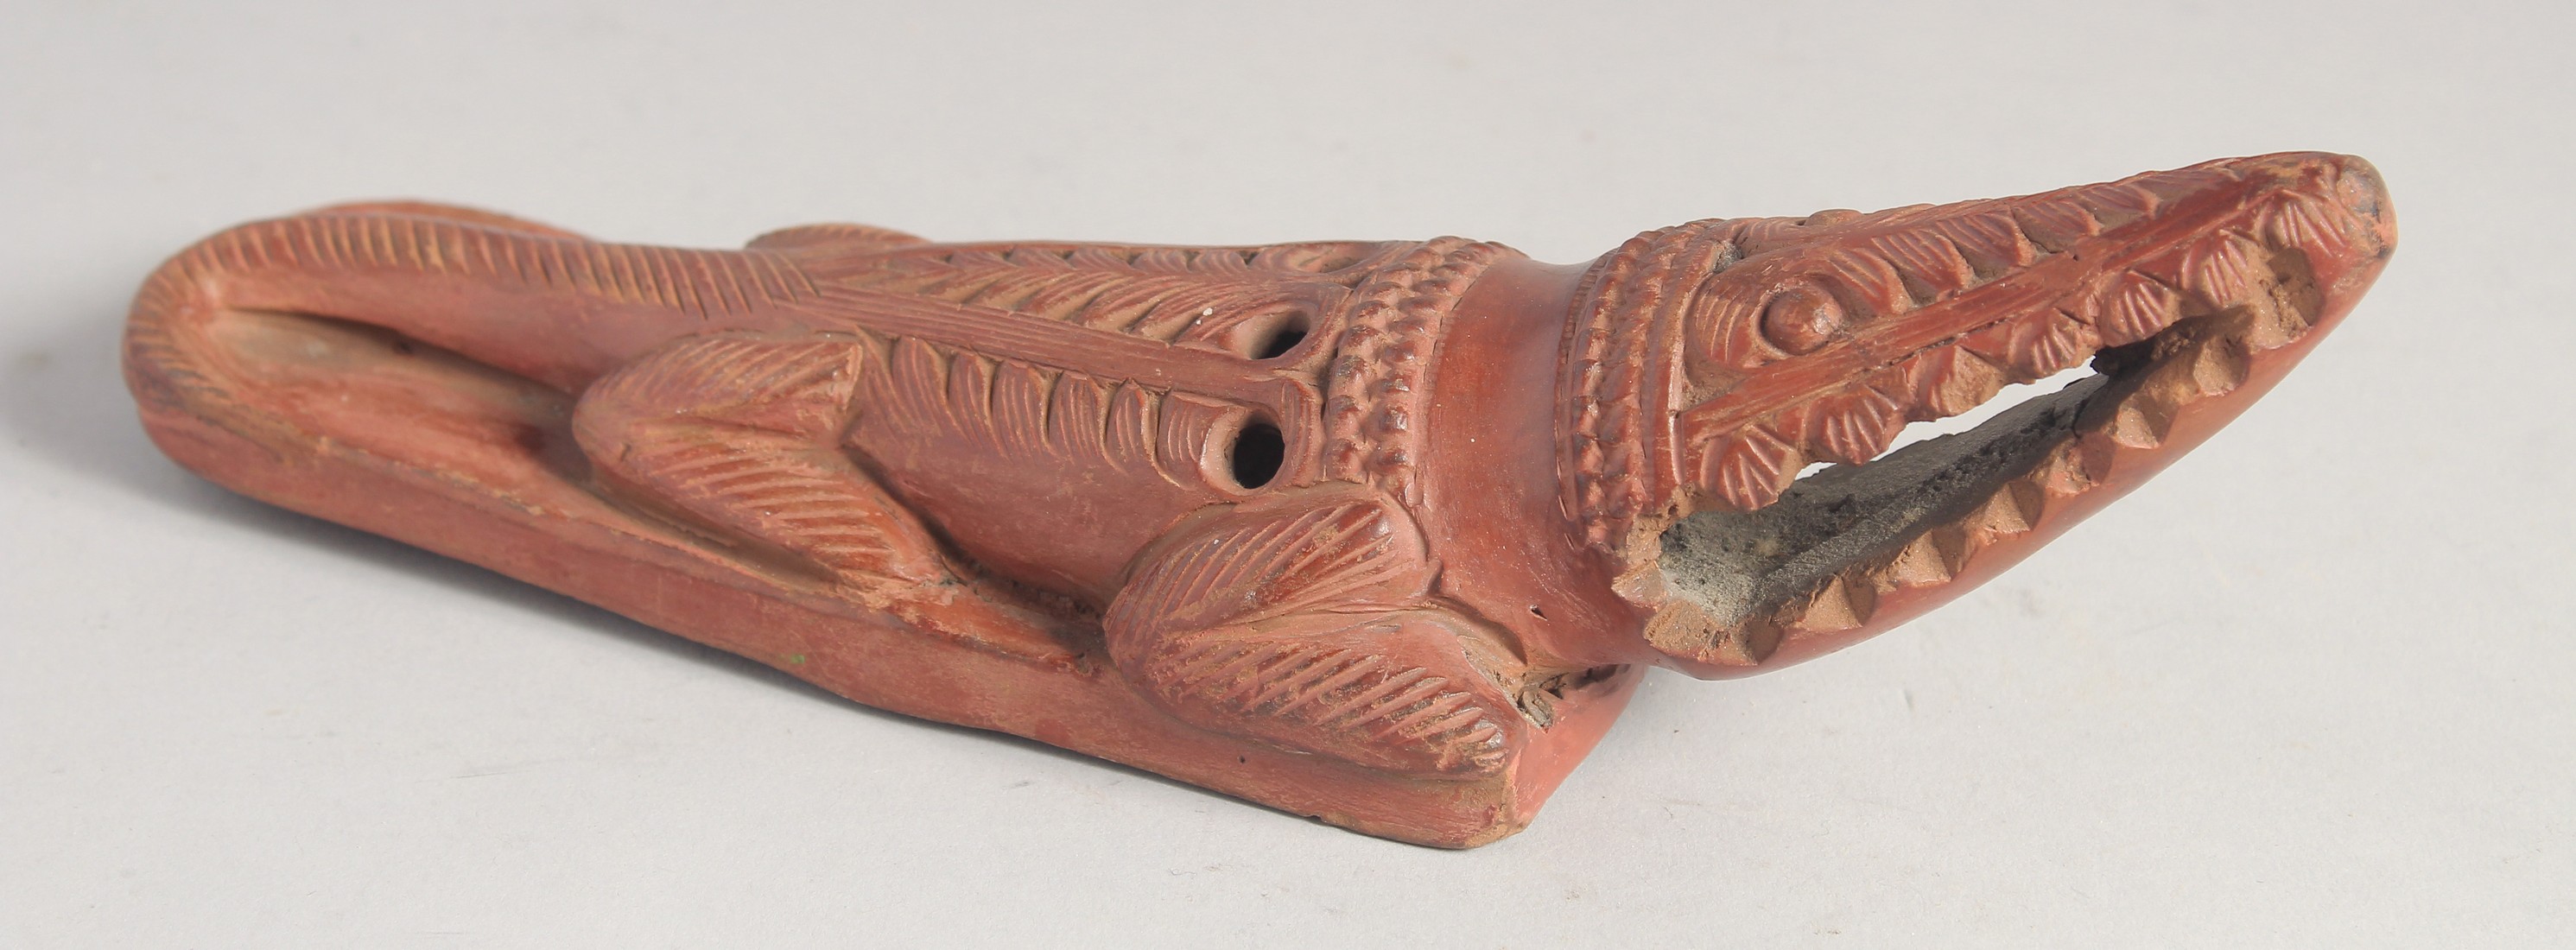 TWO 19TH CENTURY OTTOMAN EGYPTIAN TOPHANE CLAY CROCODILE FOOT SCRUBBERS. 22cm and 19cm - Image 3 of 8